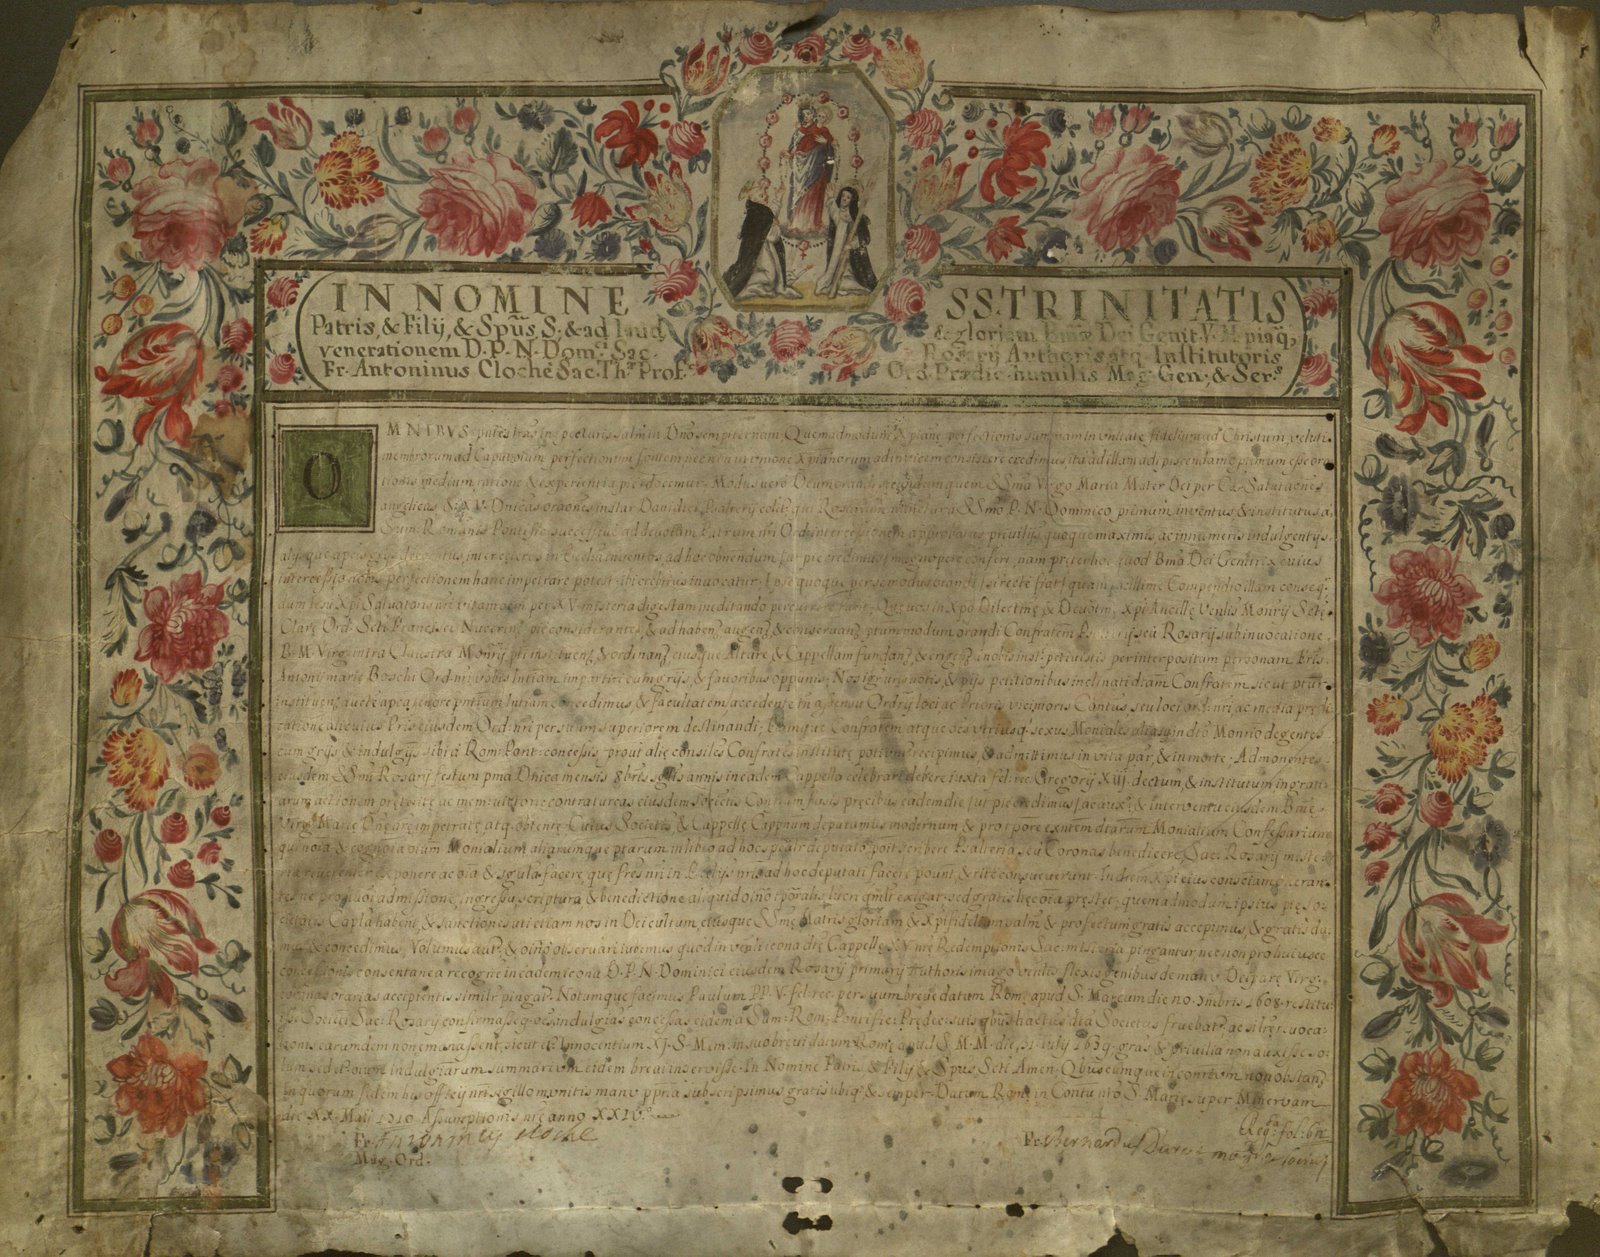 A worn-down page with Latin writing, featuring an illustrated border of roses